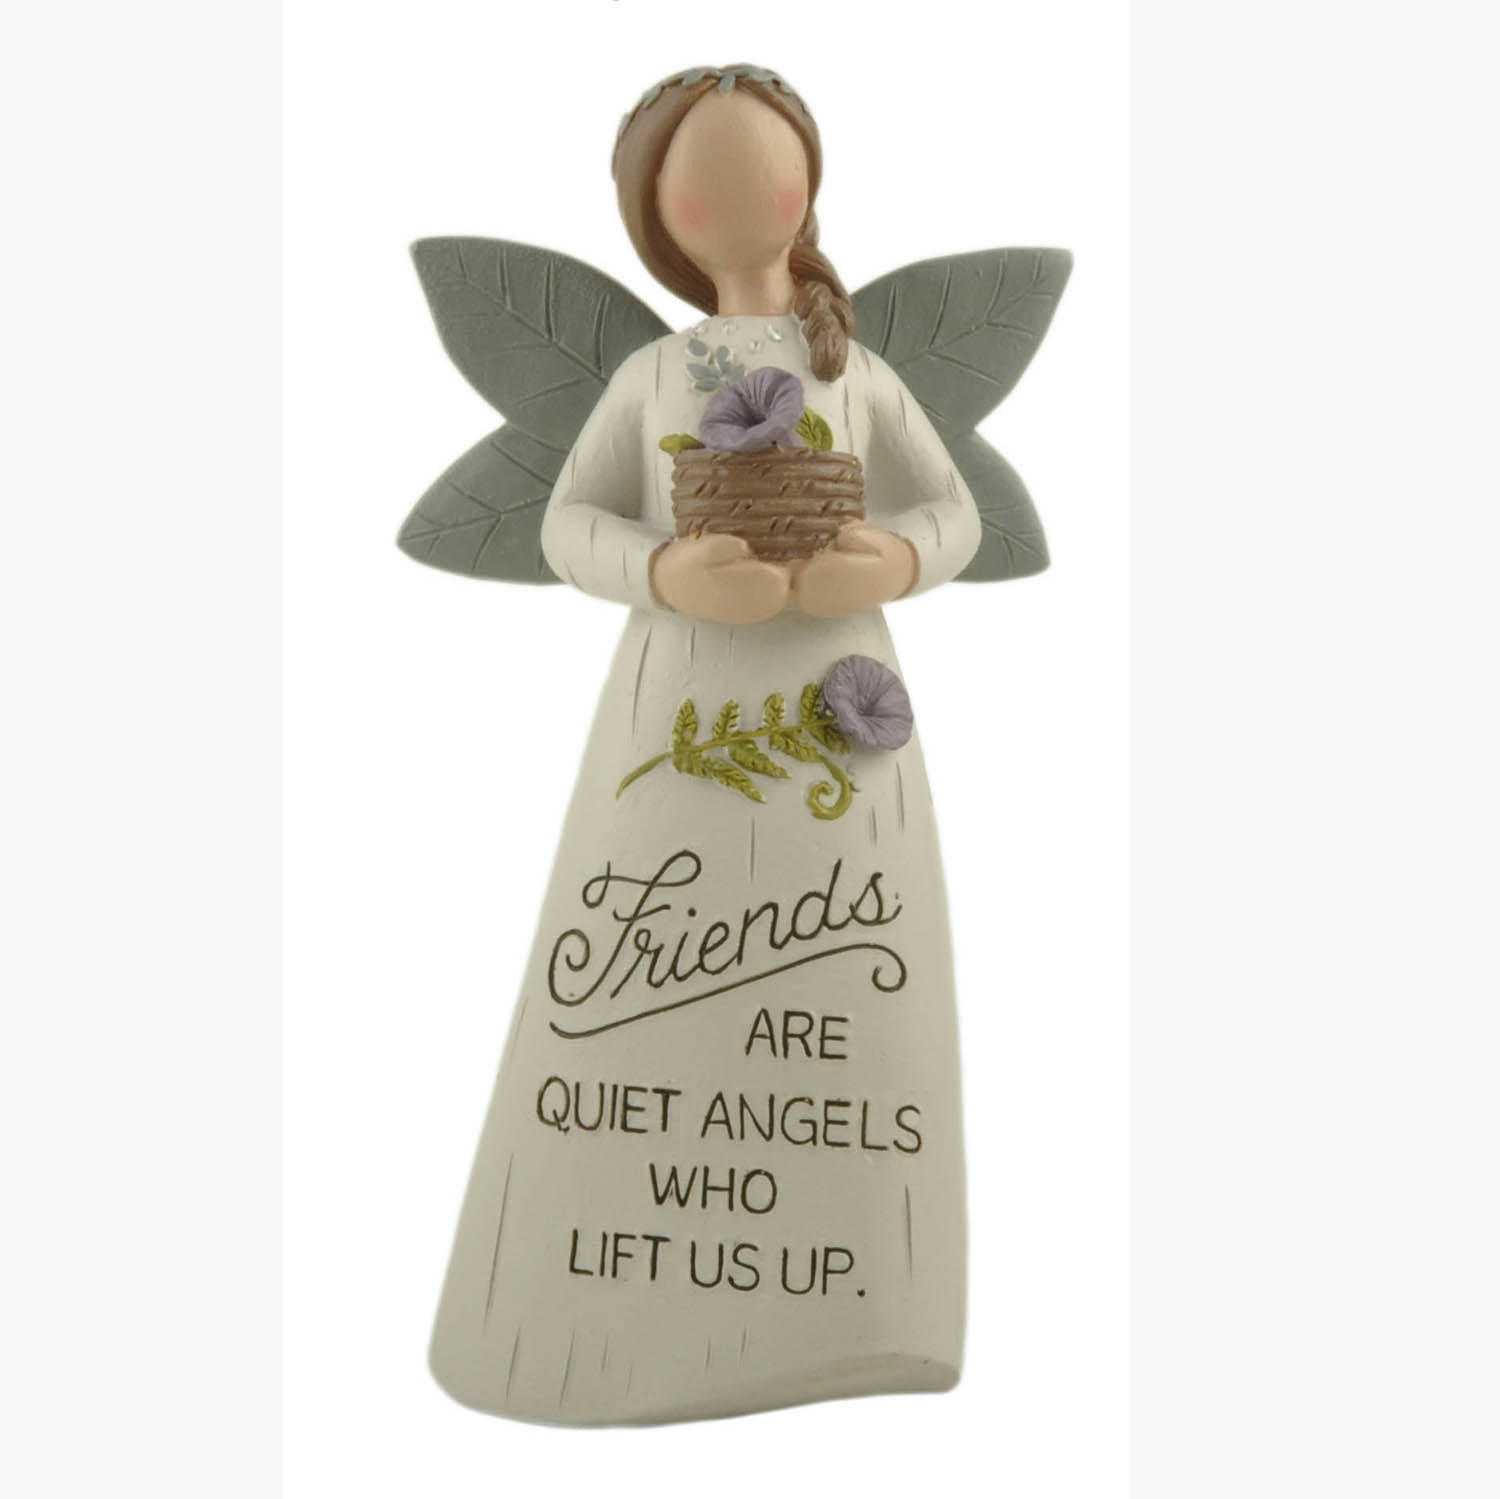 Wholesale New Resin Crafts Garden Angel with Flower Pot for Home Decoration by Handmade Carved231-13641